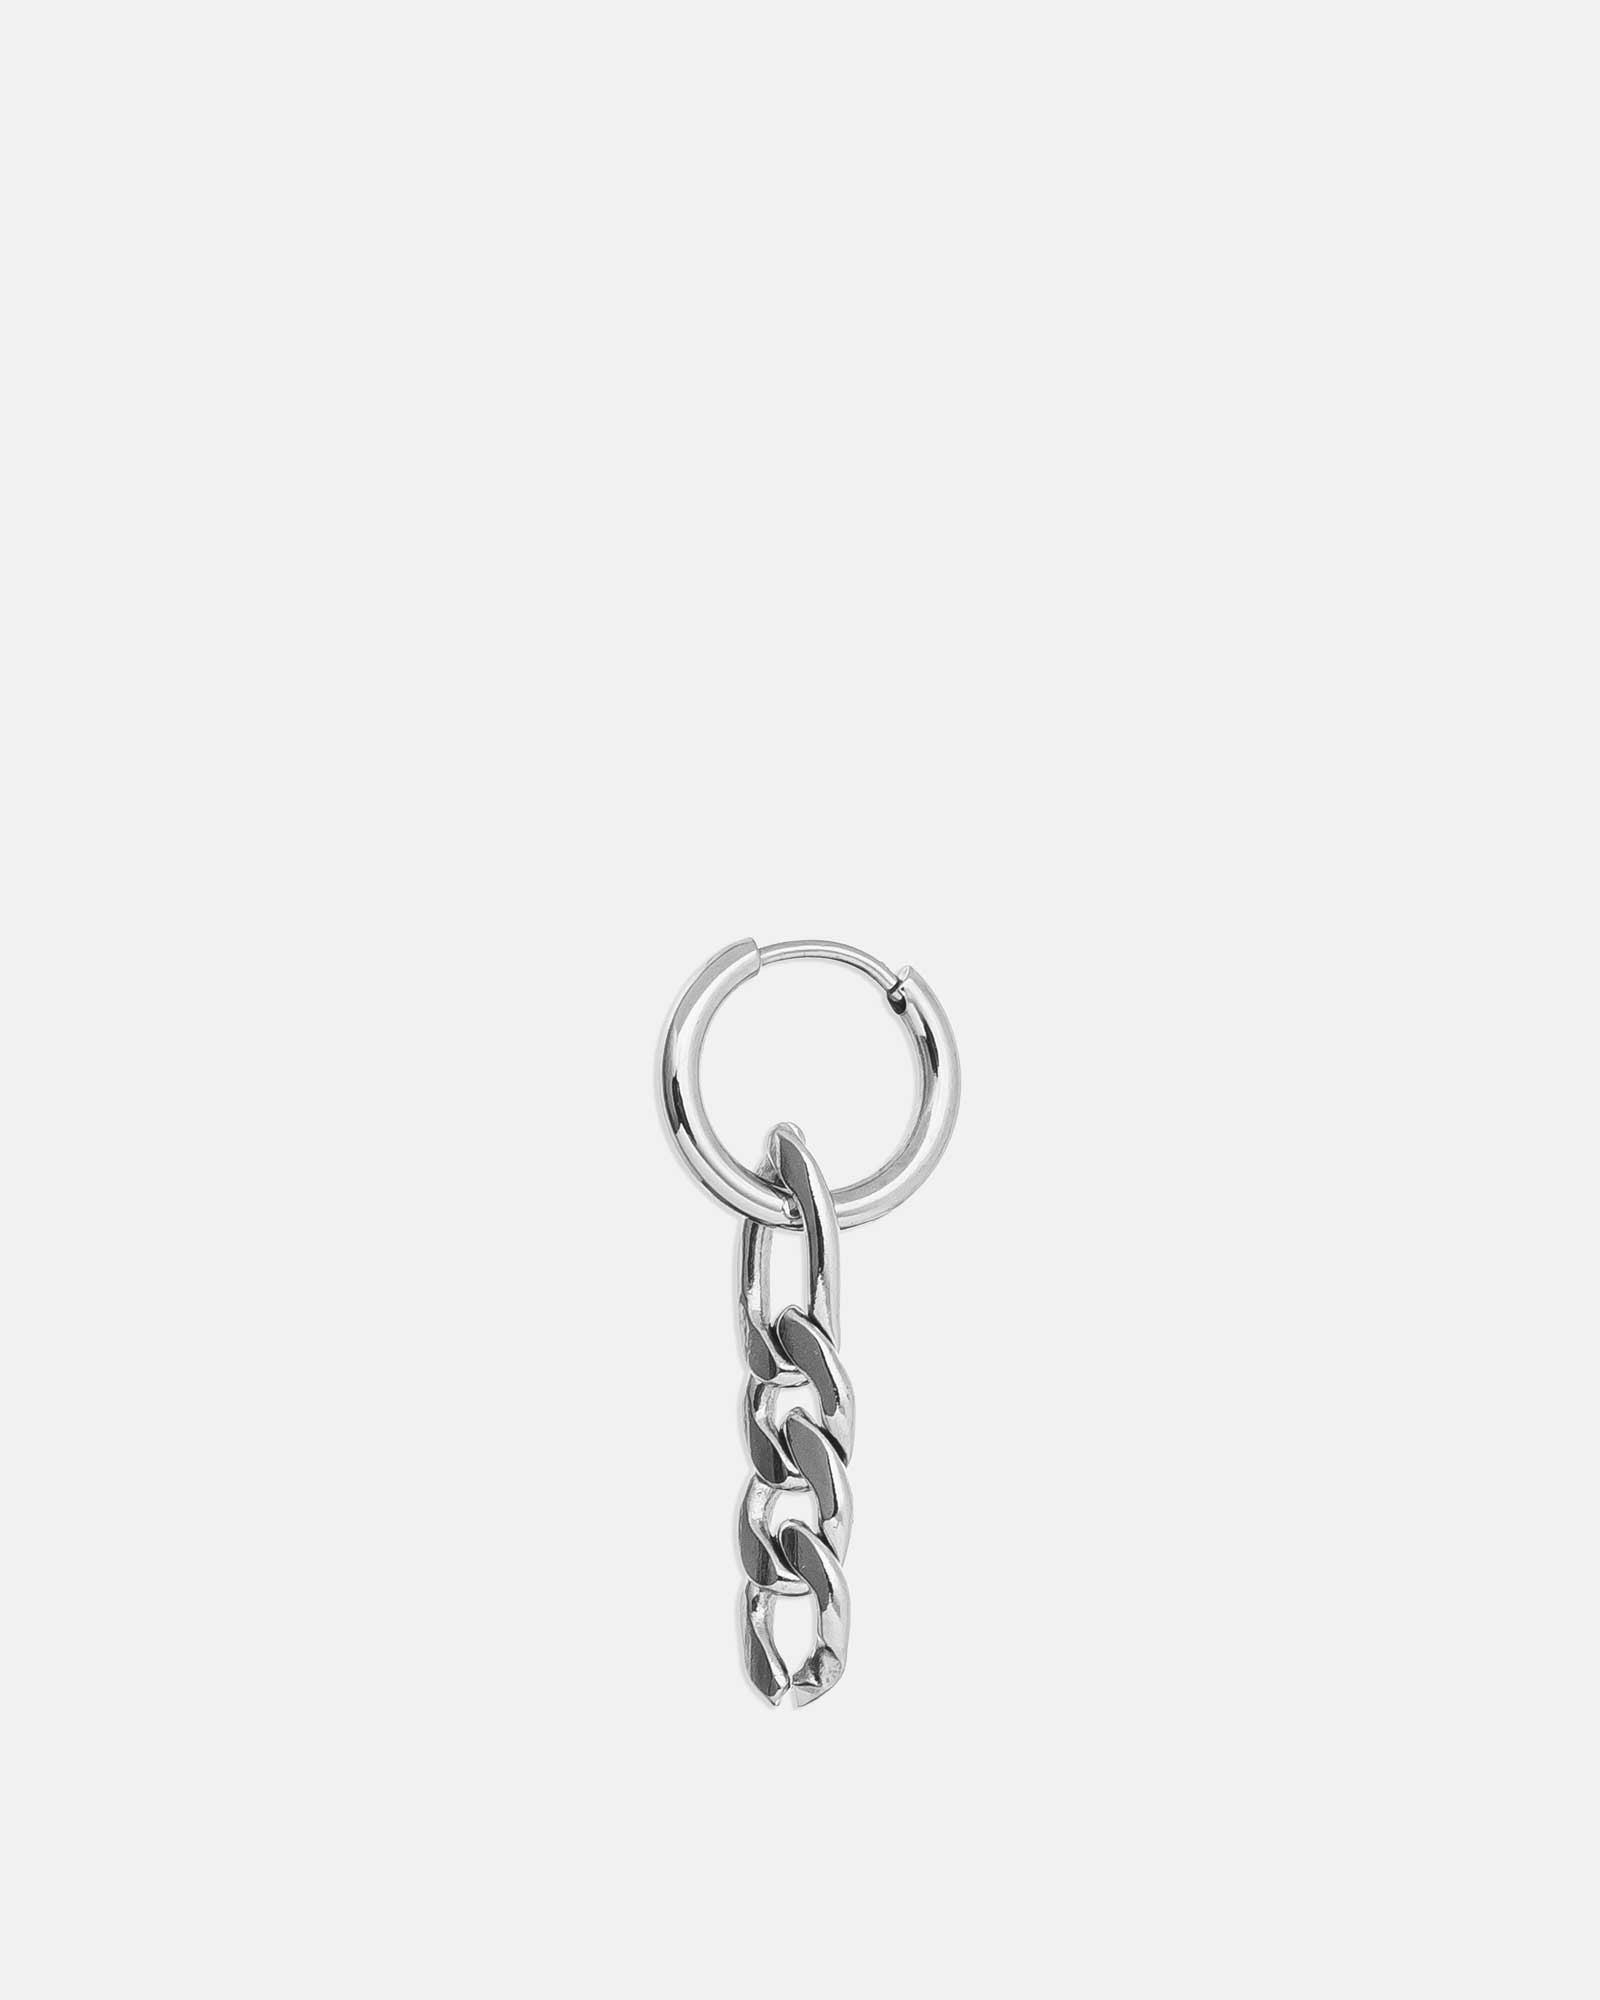 Halong Bay - Stainless Steel Earring